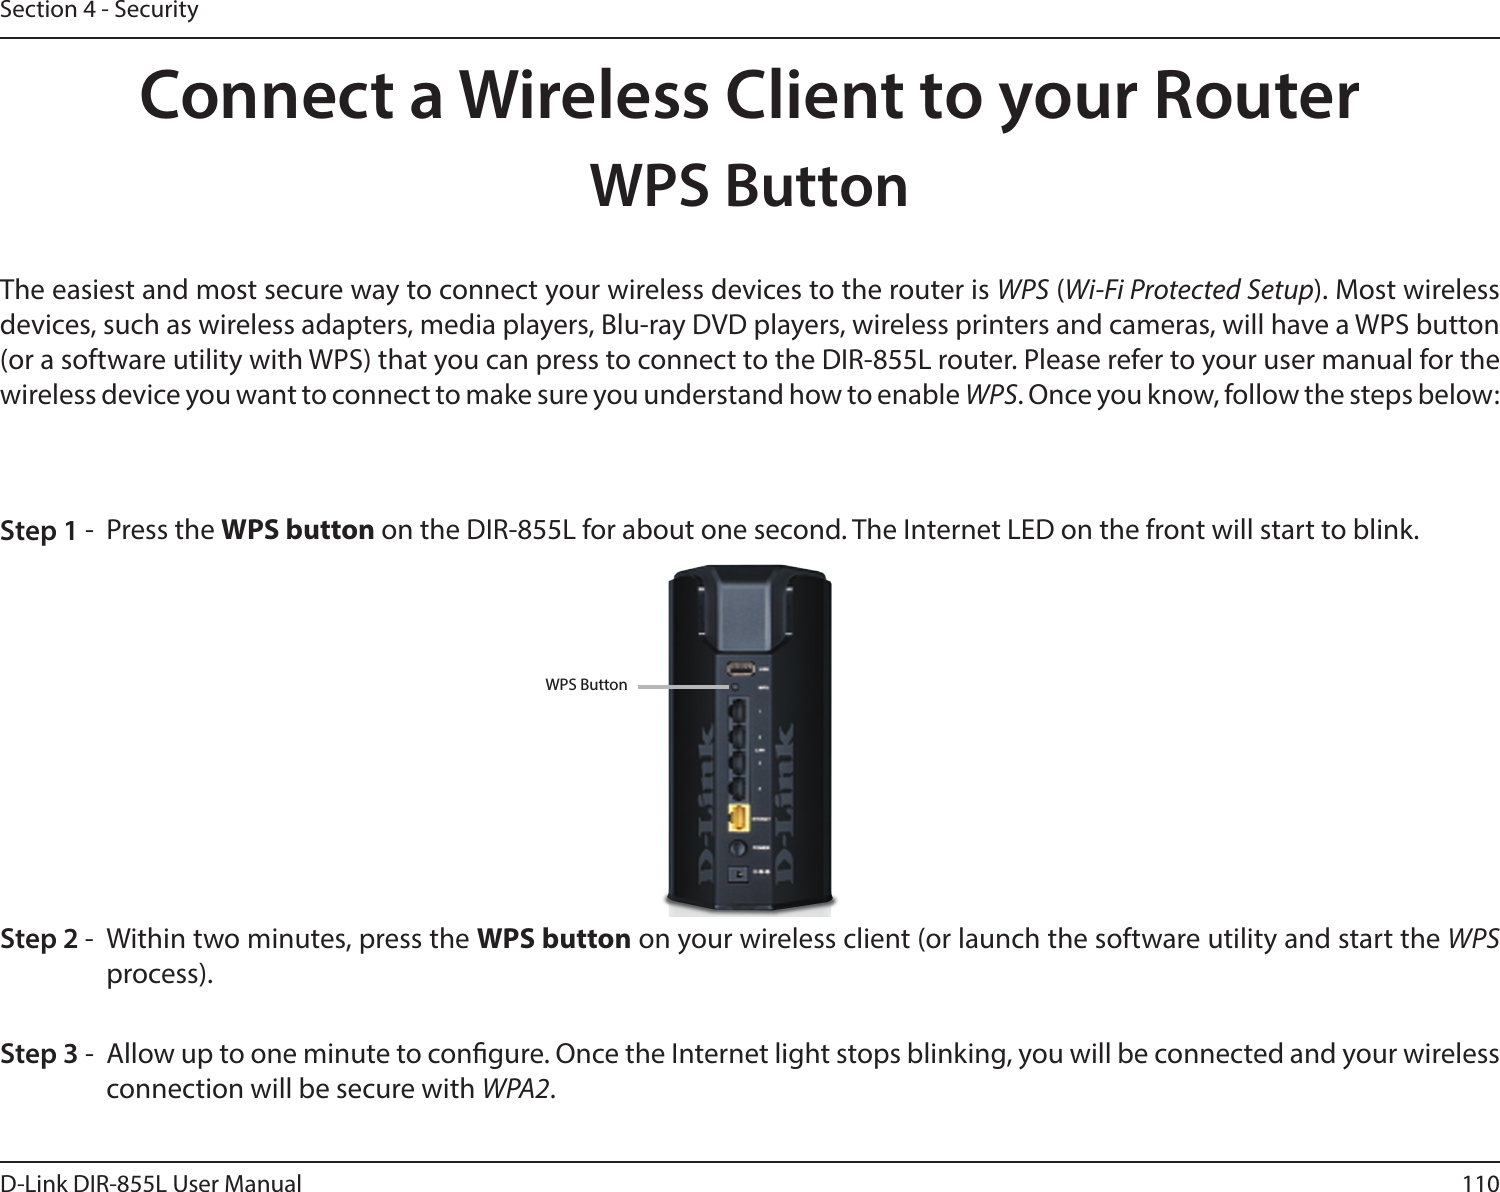 110D-Link DIR-855L User ManualSection 4 - SecurityConnect a Wireless Client to your RouterWPS ButtonStep 2 -  Within two minutes, press the WPS button on your wireless client (or launch the software utility and start the WPS process).The easiest and most secure way to connect your wireless devices to the router is WPS (Wi-Fi Protected Setup). Most wireless devices, such as wireless adapters, media players, Blu-ray DVD players, wireless printers and cameras, will have a WPS button (or a software utility with WPS) that you can press to connect to the DIR-855L router. Please refer to your user manual for the wireless device you want to connect to make sure you understand how to enable WPS. Once you know, follow the steps below:Step 1 -  Press the WPS button on the DIR-855L for about one second. The Internet LED on the front will start to blink.Step 3 -  Allow up to one minute to congure. Once the Internet light stops blinking, you will be connected and your wireless connection will be secure with WPA2.WPS Button